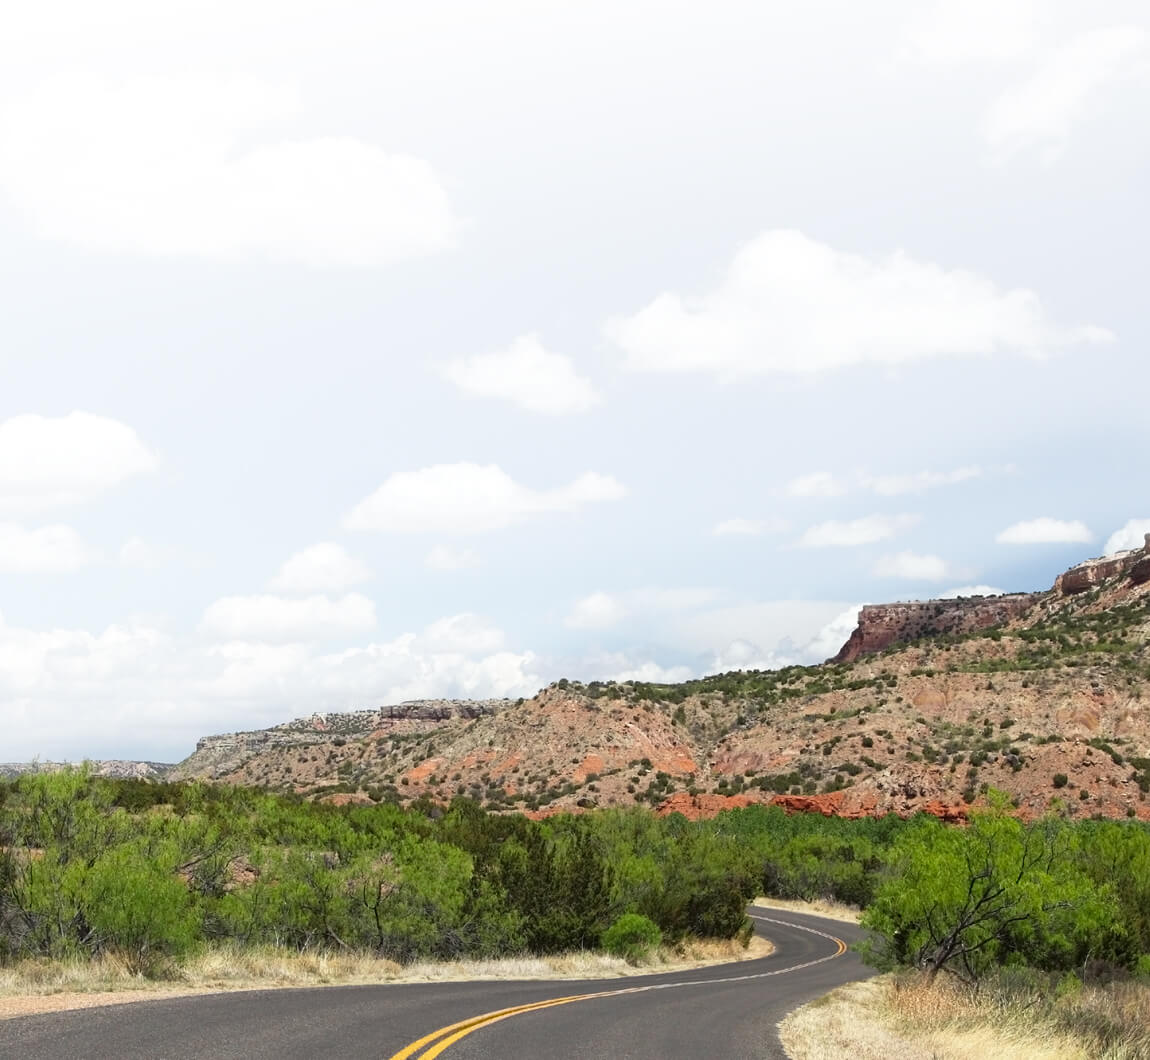 Road in Palo Duro Canyon